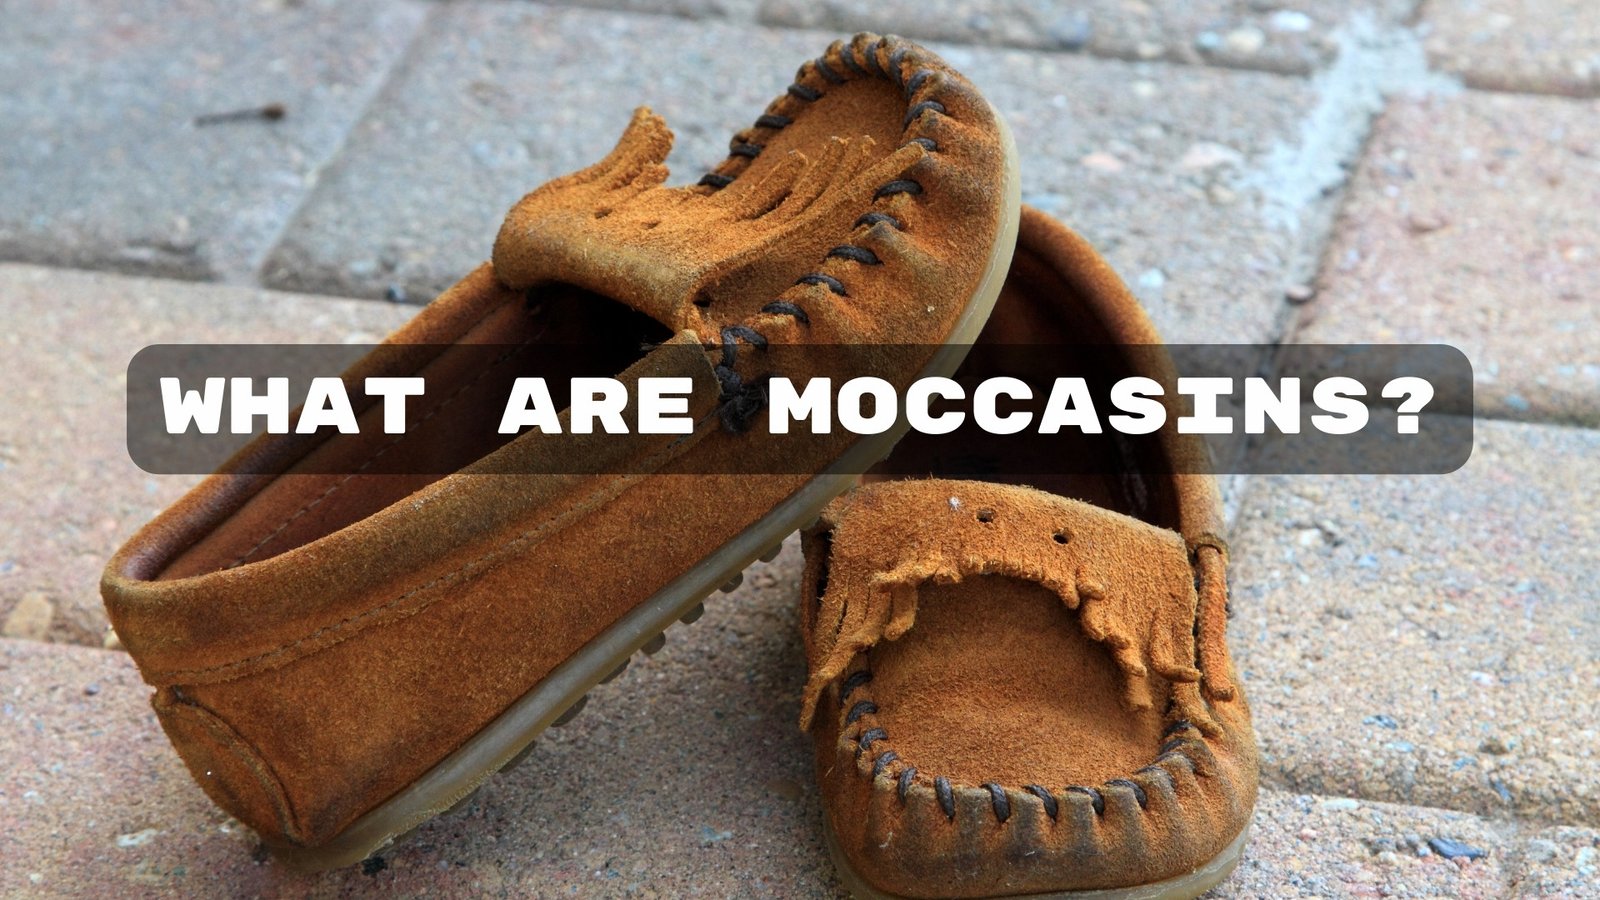 What Are Moccasins?